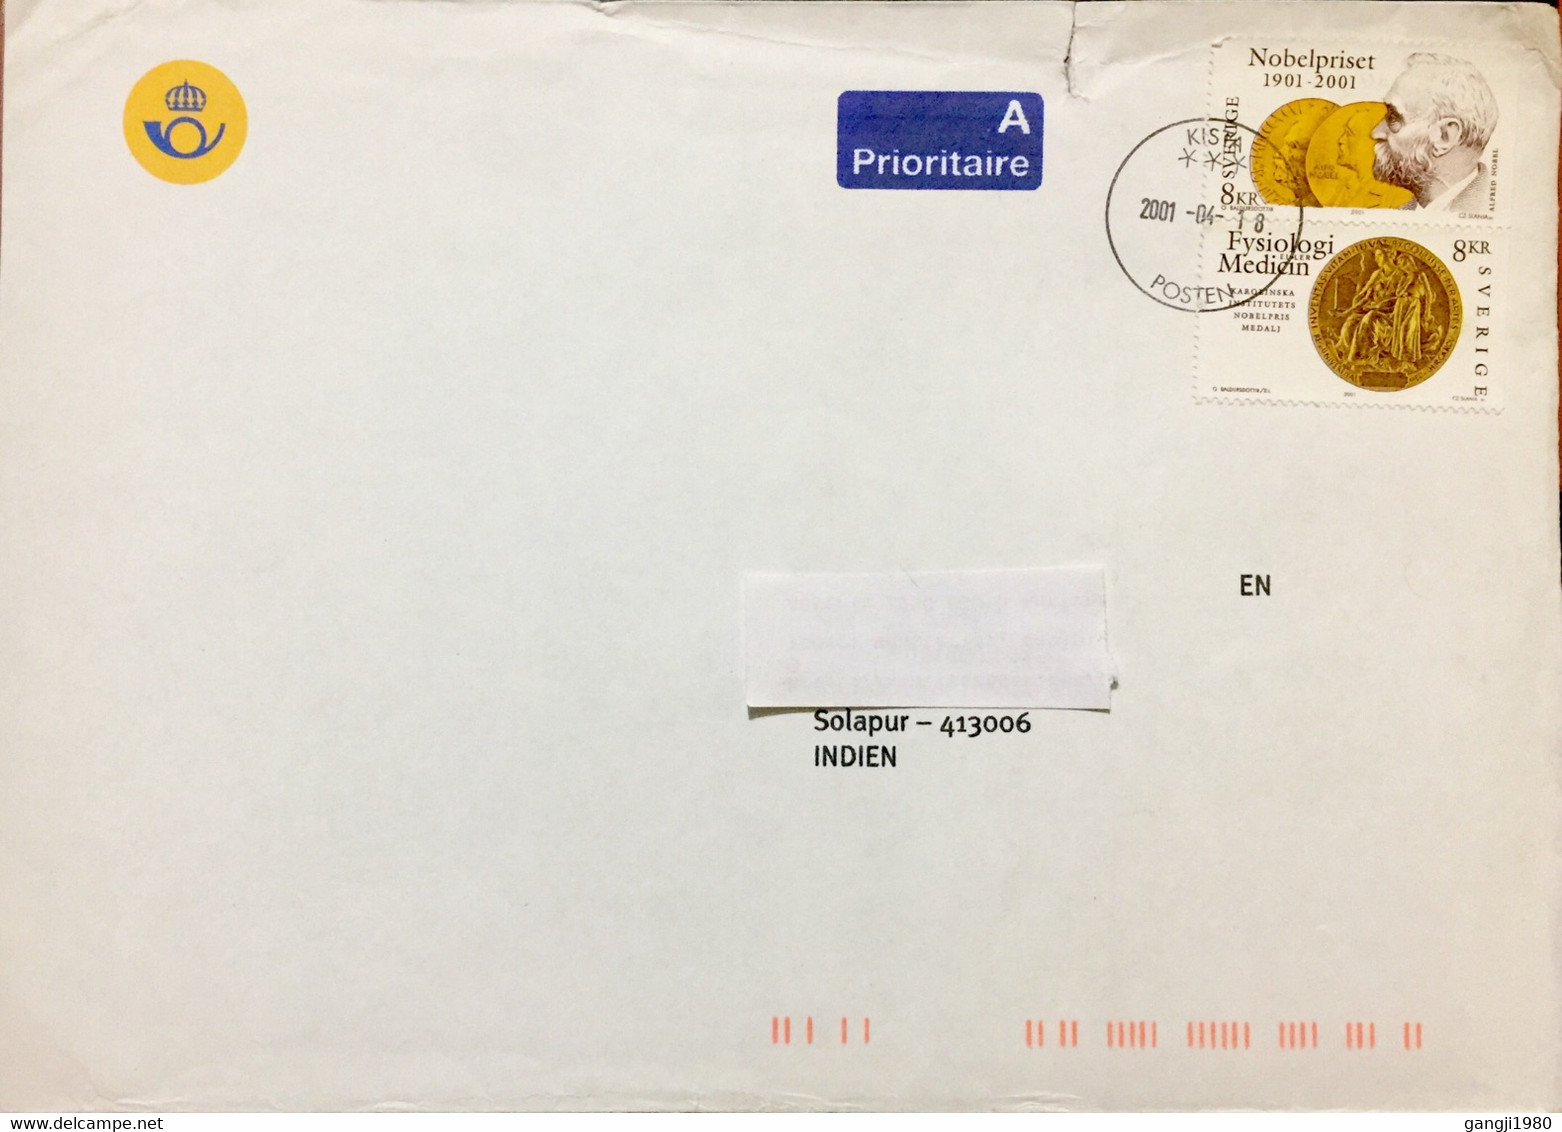 SWEDEN 2001, COVER USED TO INDIA, NOBEL PRIZE & MEDAL, SE TENANT STAMP, KISTA CITY CANCEL,16 KROWN RATE - Covers & Documents